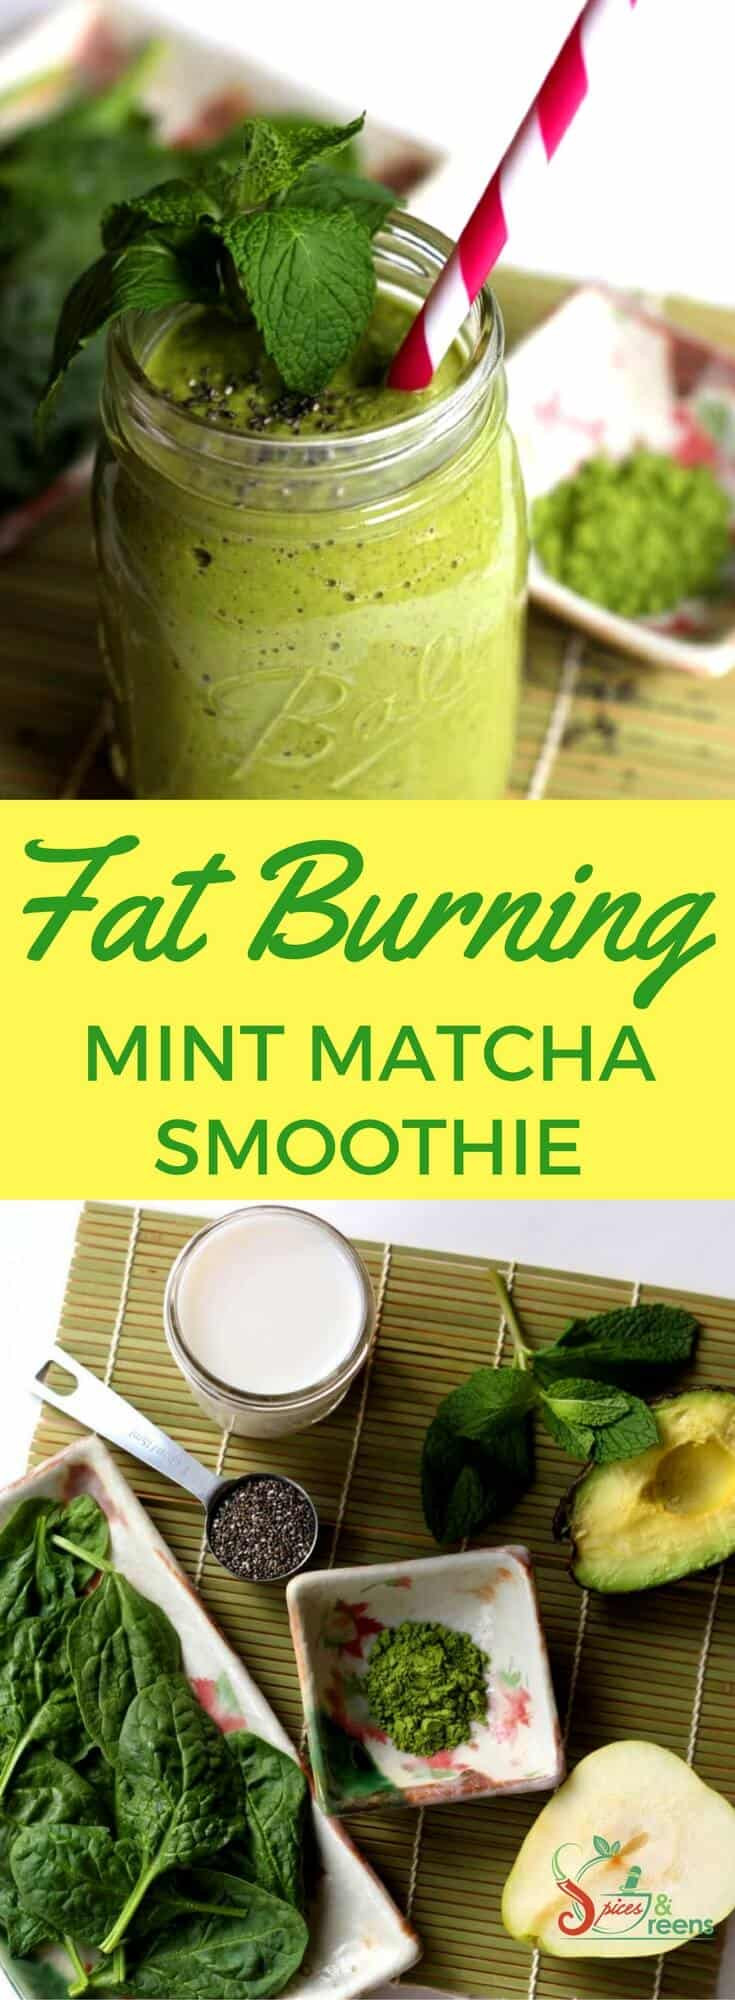 Matcha Smoothie Recipes
 Mint Matcha Smoothie Spices & Greens